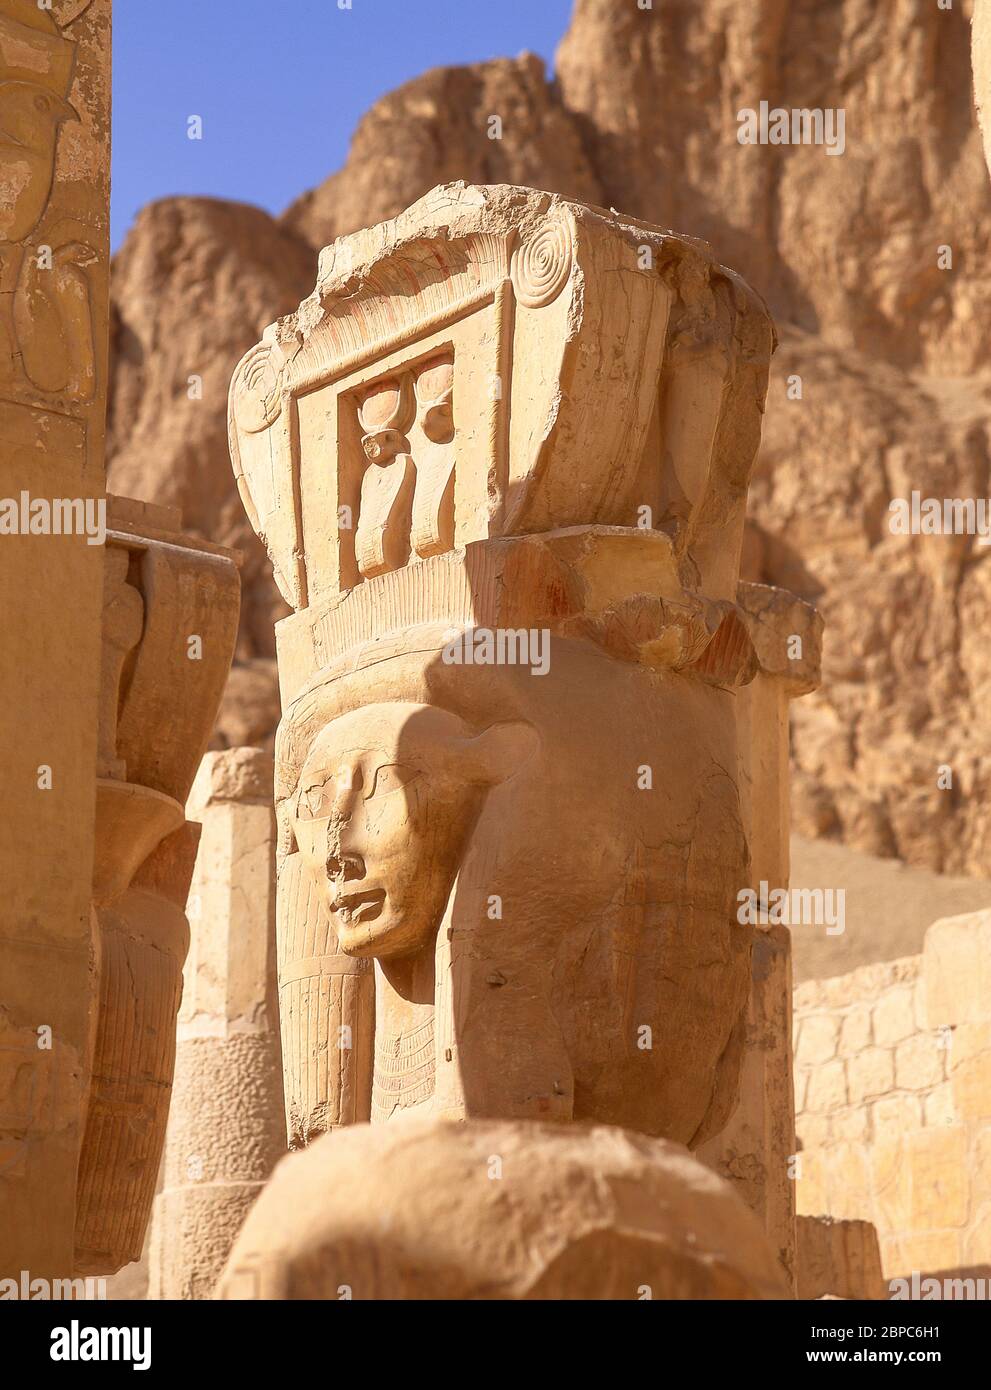 Carved figures at Queen Hatshepsut's Mortuary Temple Complex, Deir el-Bahri, Luxor, Luxor Governorate, Republic of Egypt Stock Photo